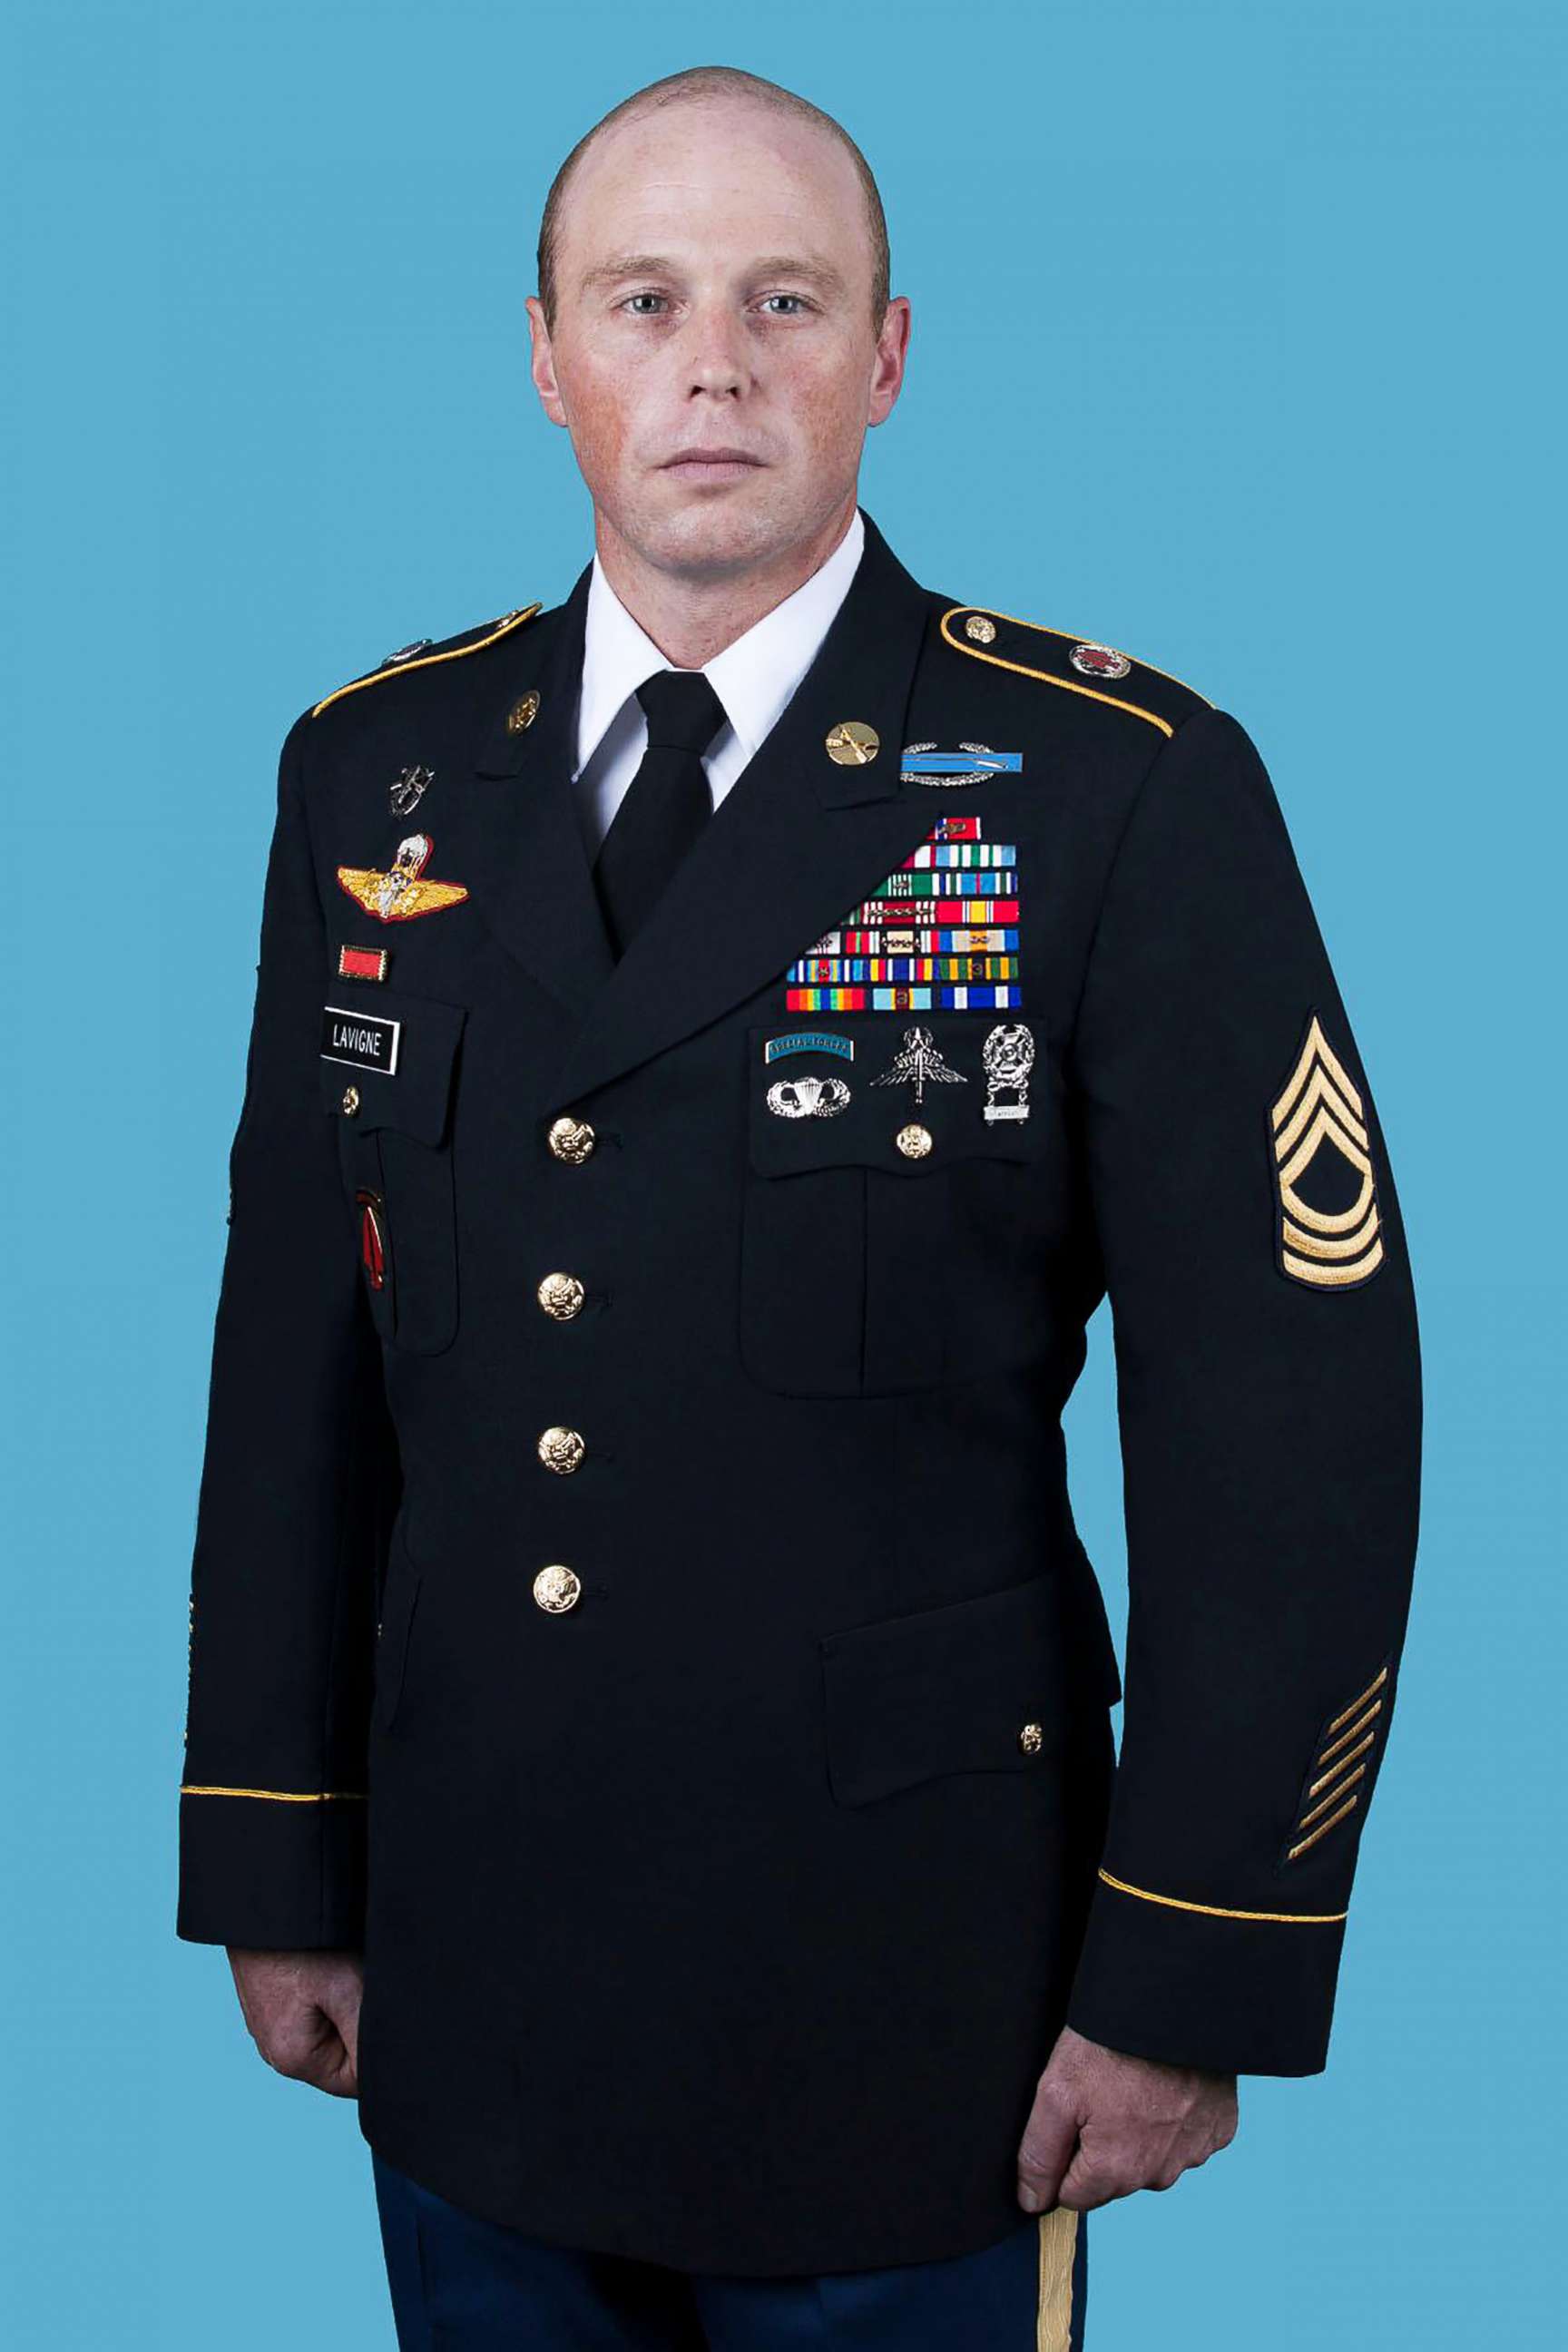 PHOTO: Master Sgt. William J. Lavigne II, pictured in an undated photo from the U.S. Army, was identified as one of two deceased individuals found in a training area of Fort Bragg in North Carolina, on Dec. 3, 2020.